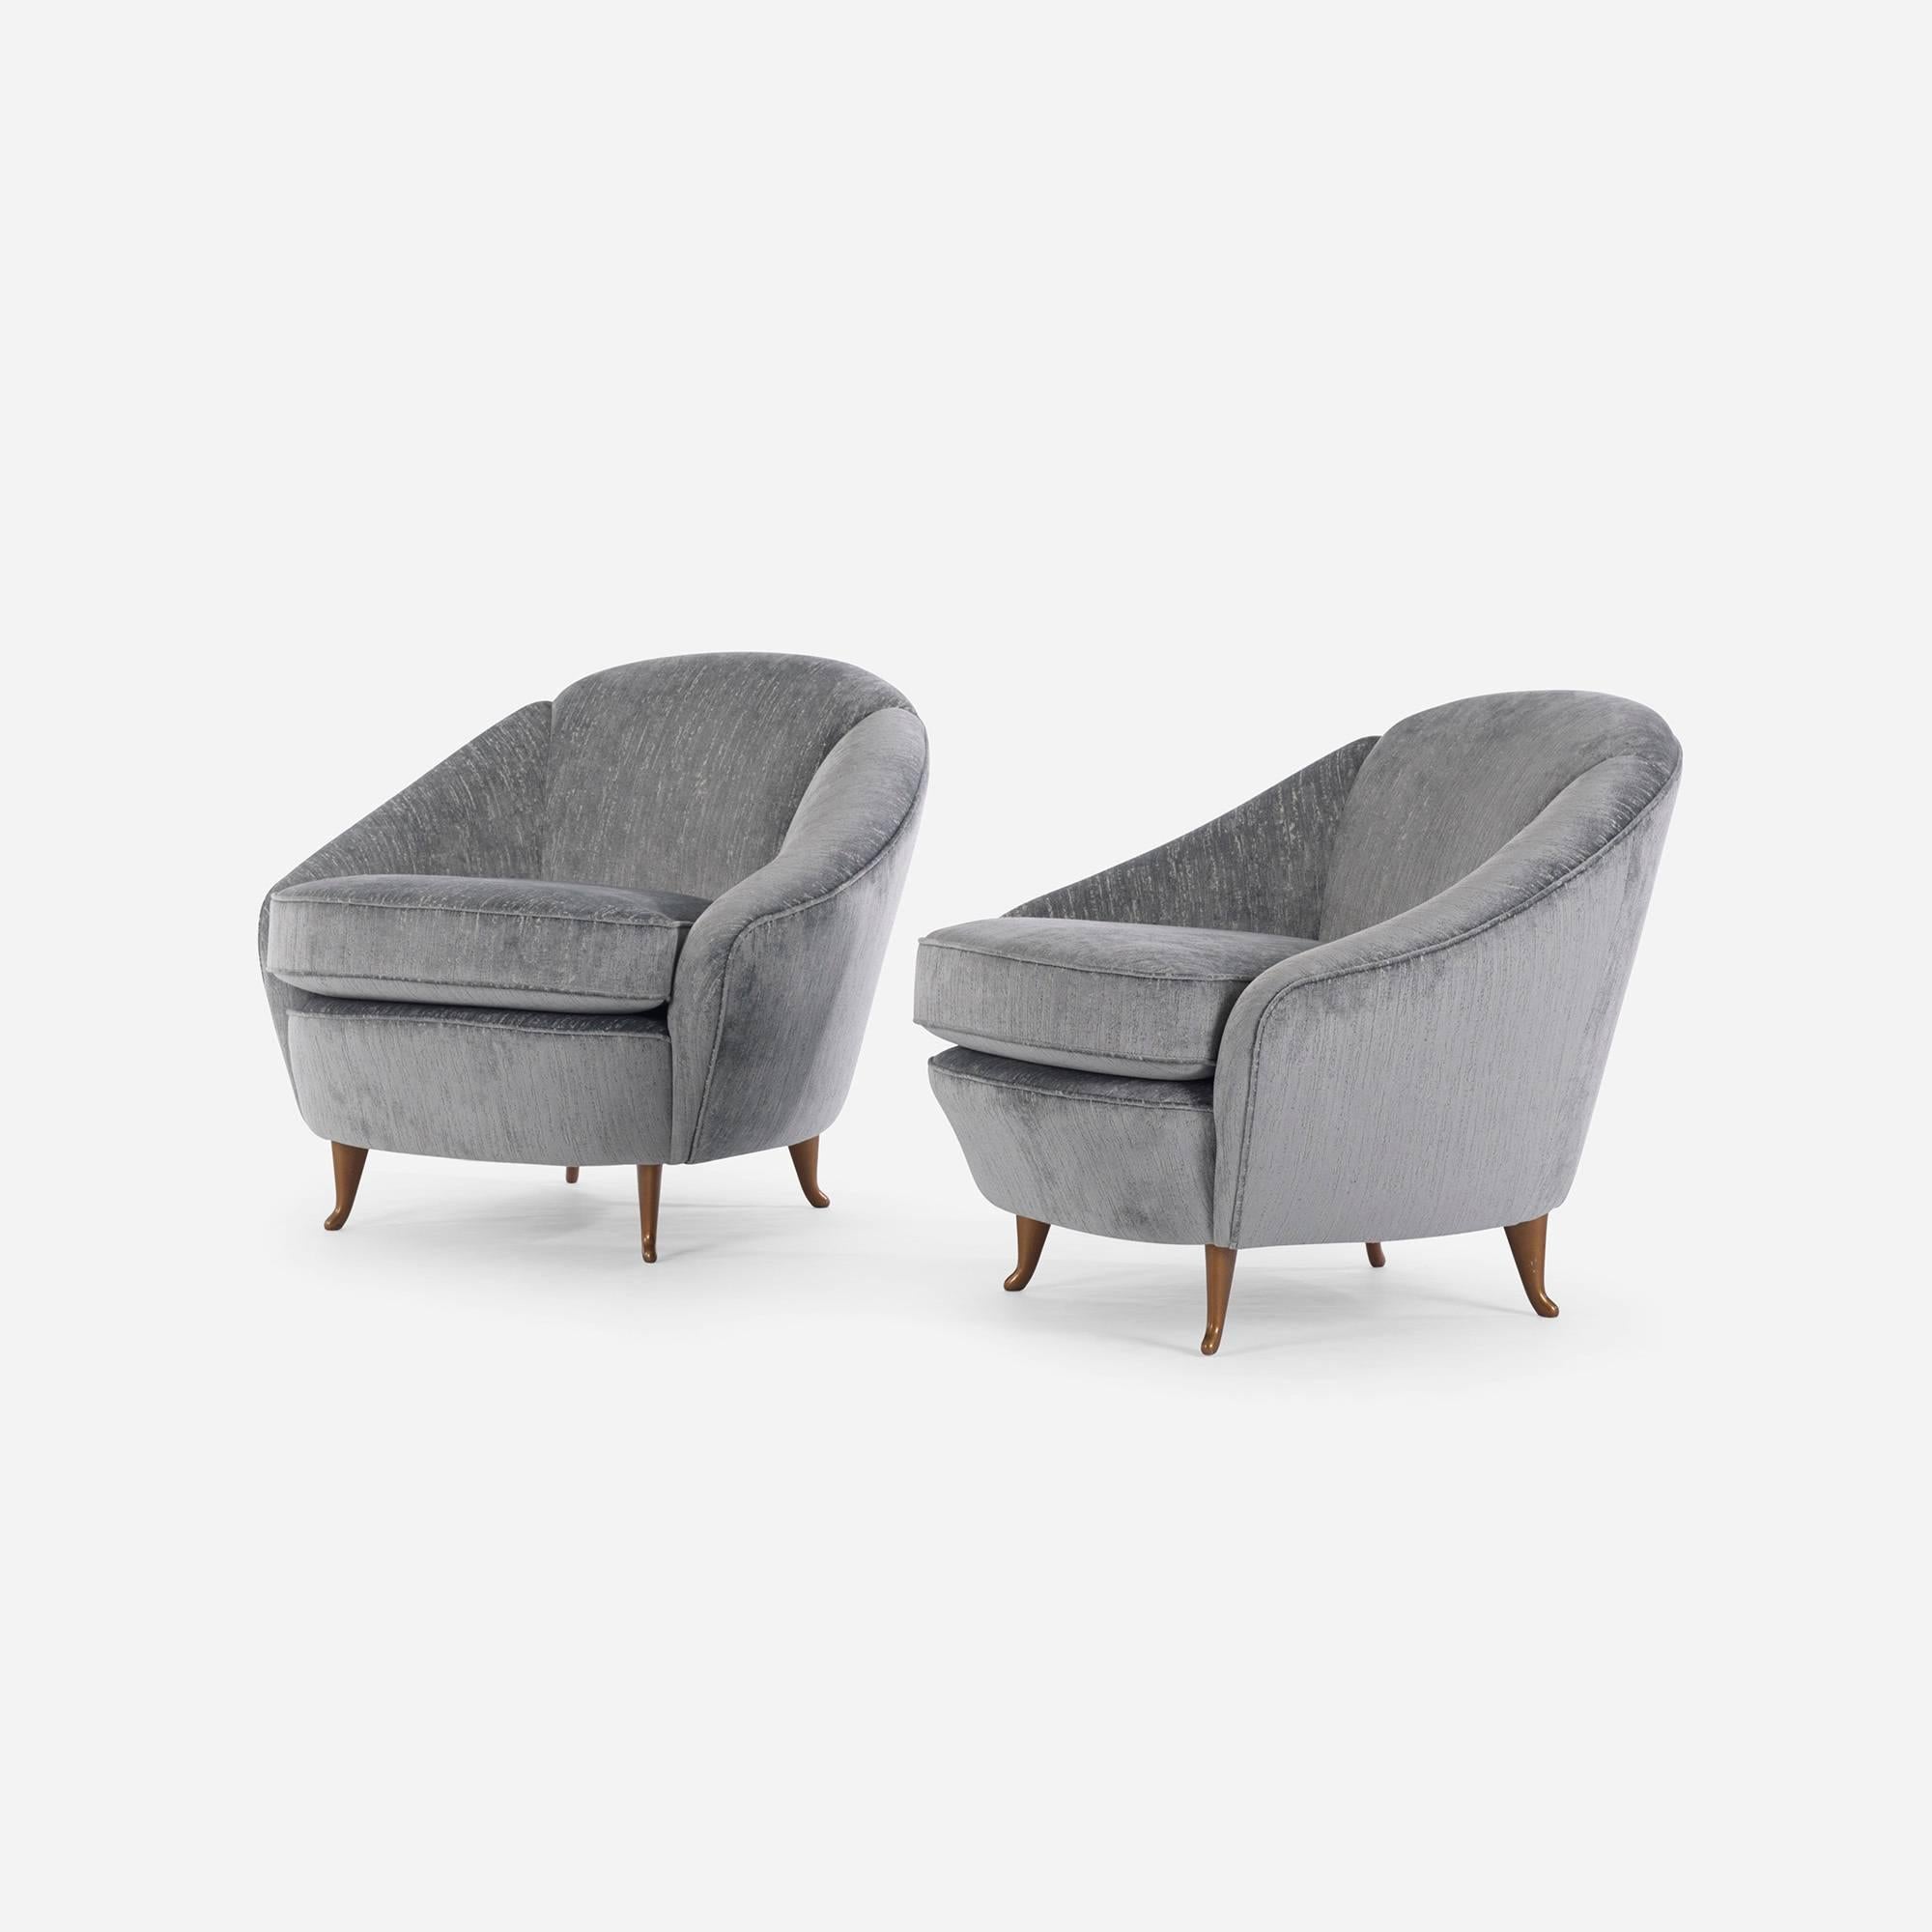 These compact and lively lounge chairs have been recently upholstered in a soft fabric with an mild but intentionally distressed appearance. Color is a greenish grey. Very chic in person.